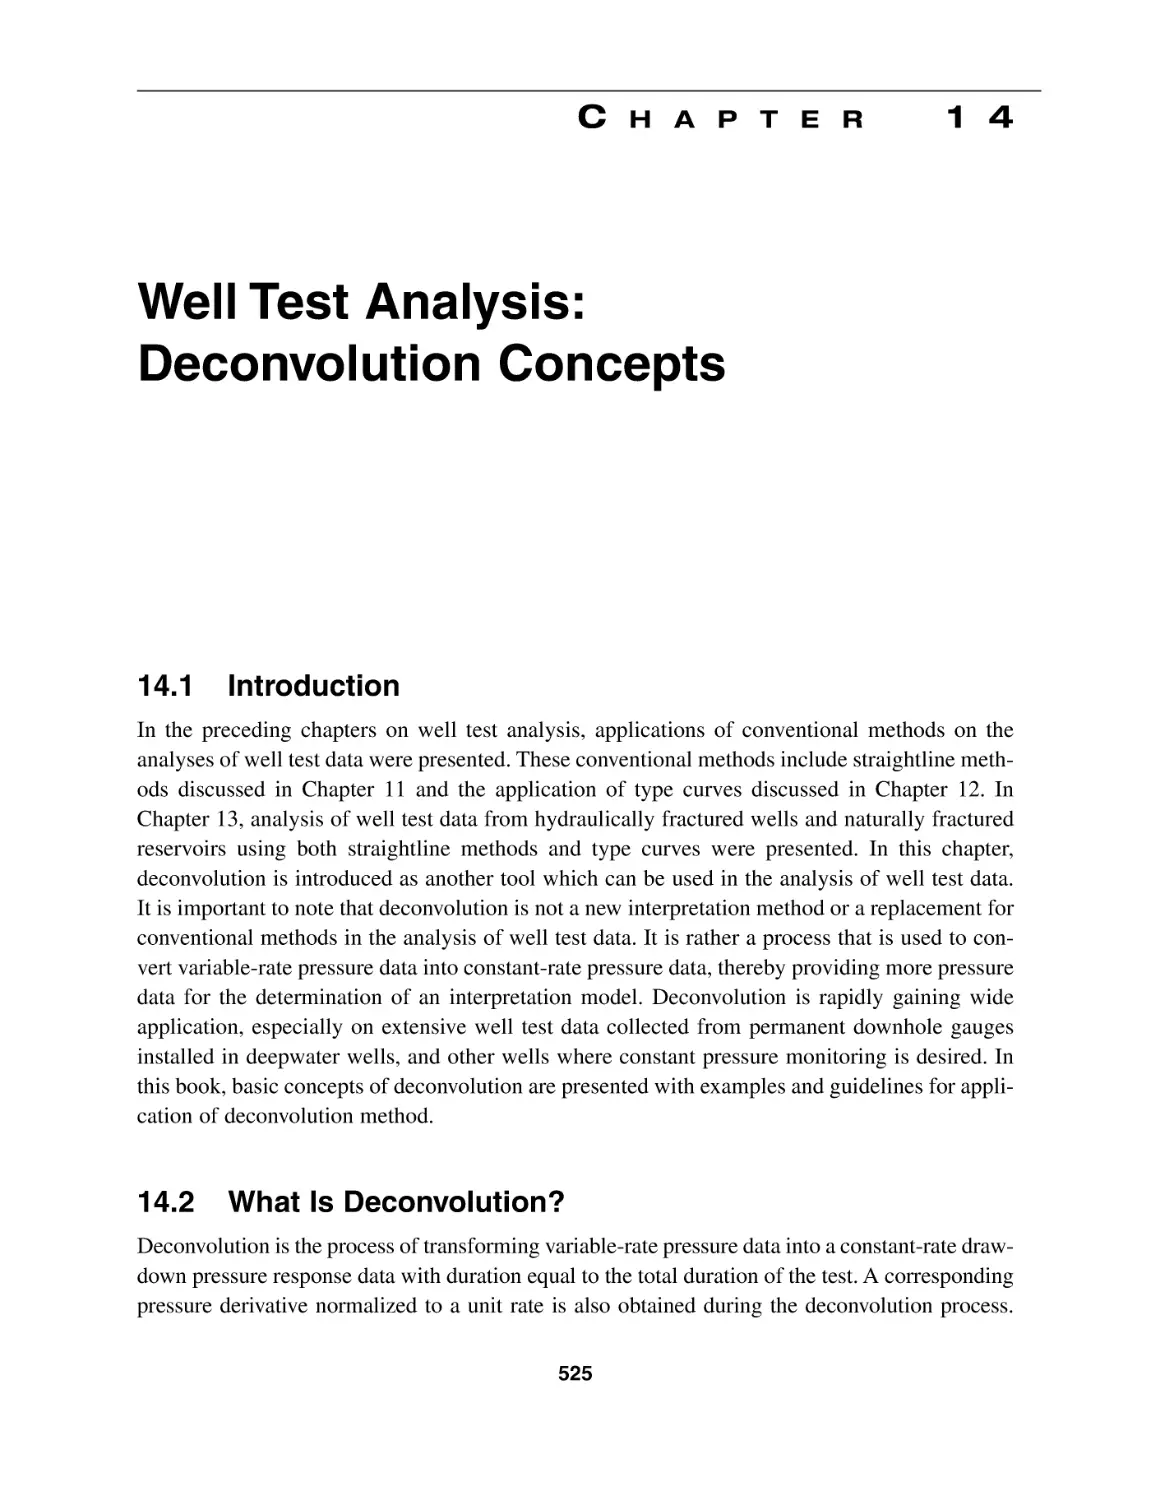 Chapter 14 Well Test Analysis
14.1 Introduction
14.2 What Is Deconvolution?